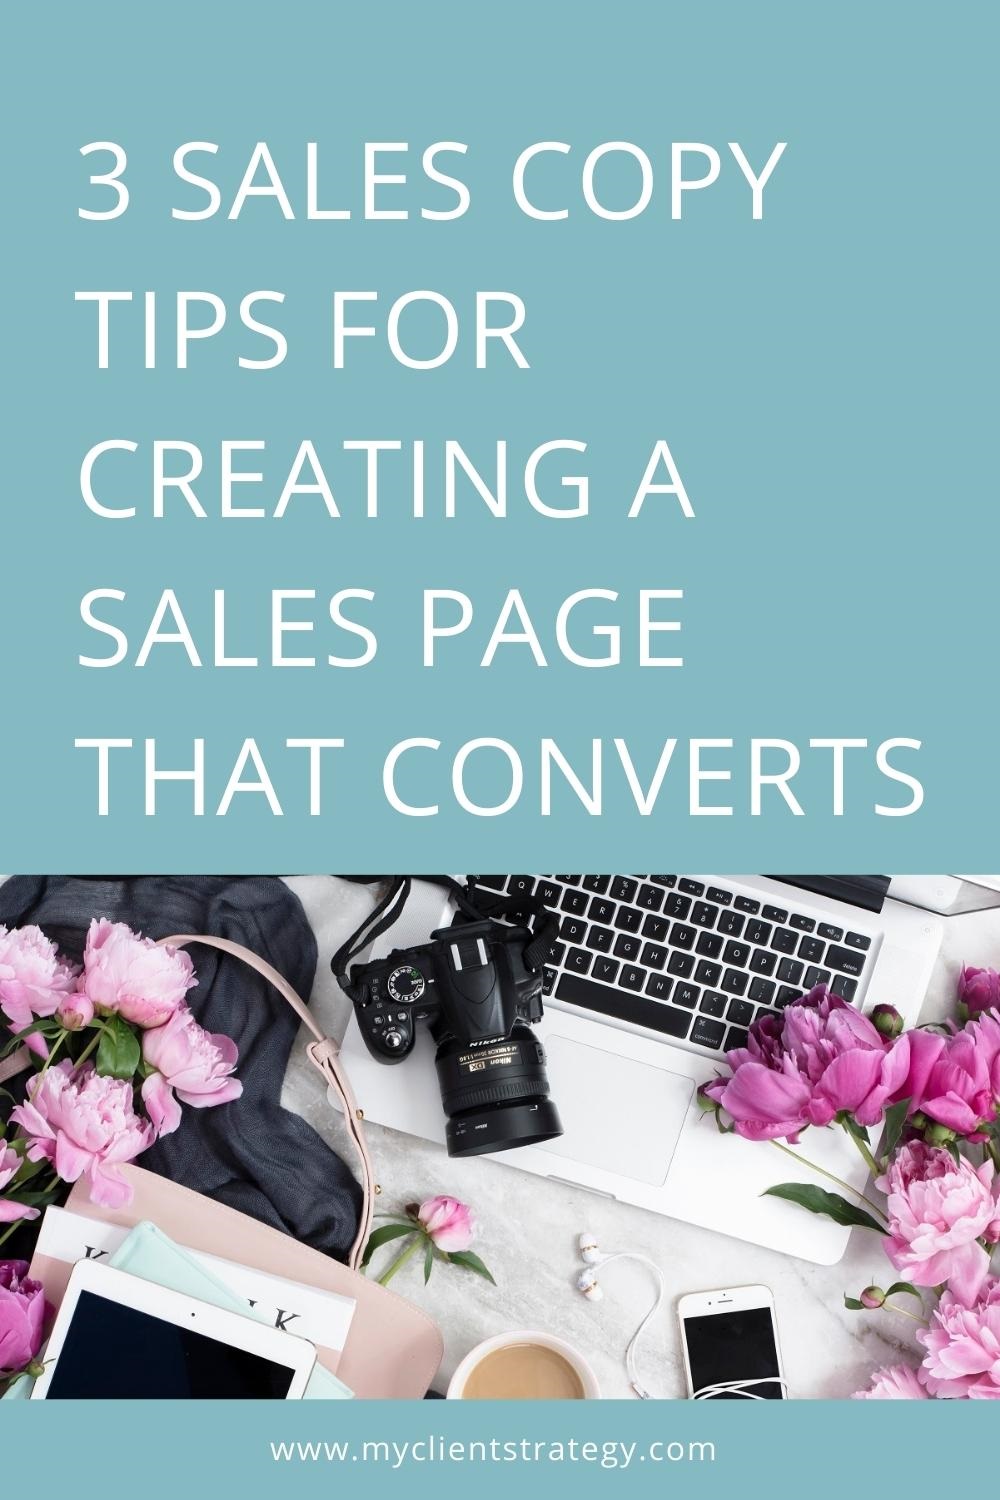 3 Sales copy tips for creating a sales page that converts